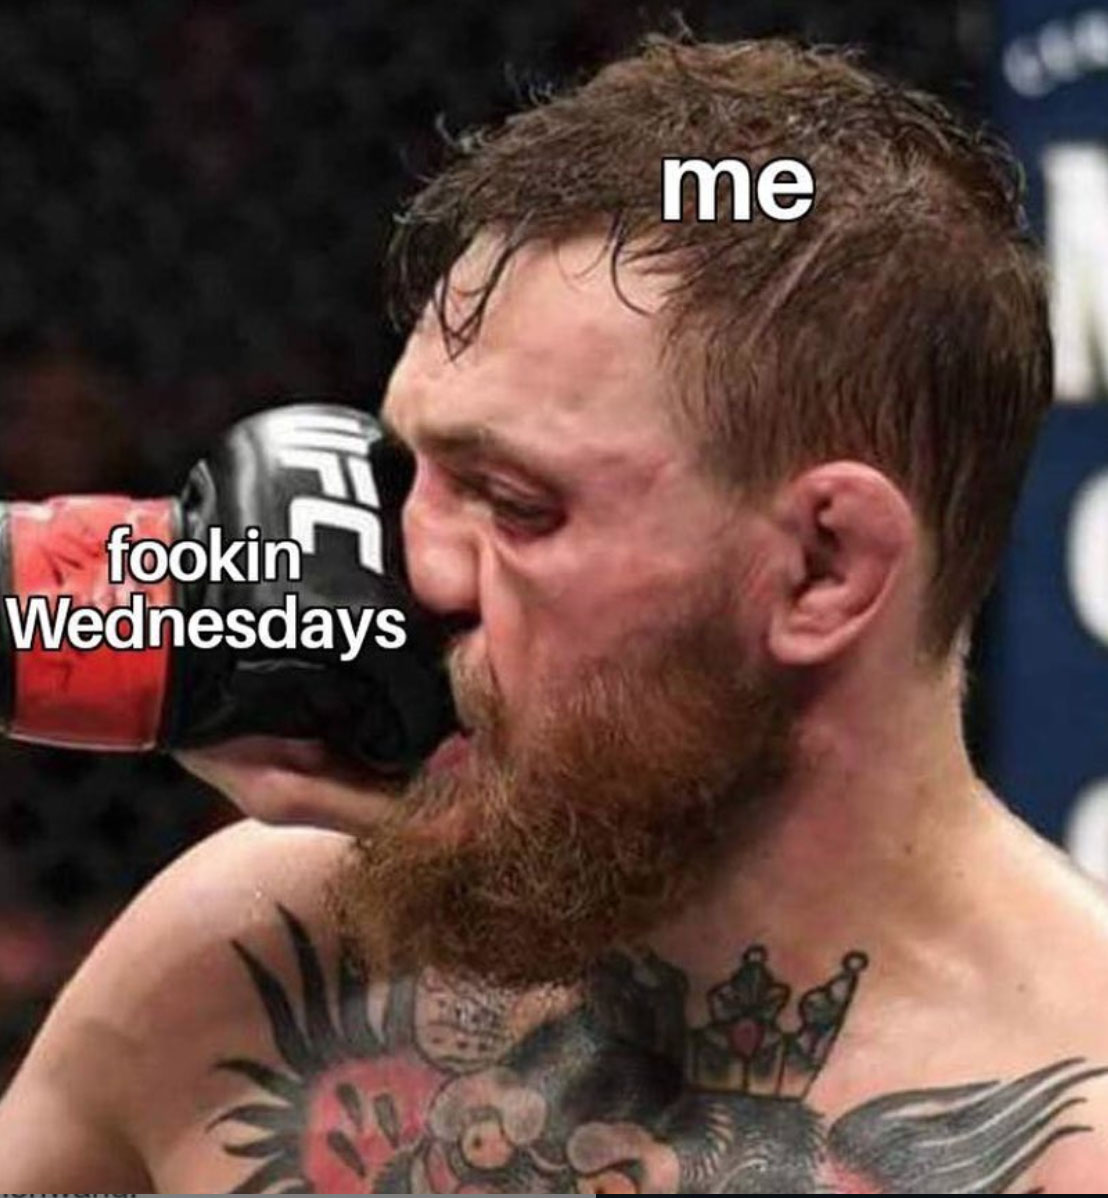 Conor McGregor getting punched in the face with the text 'me' and 'fookin Wednesdays'